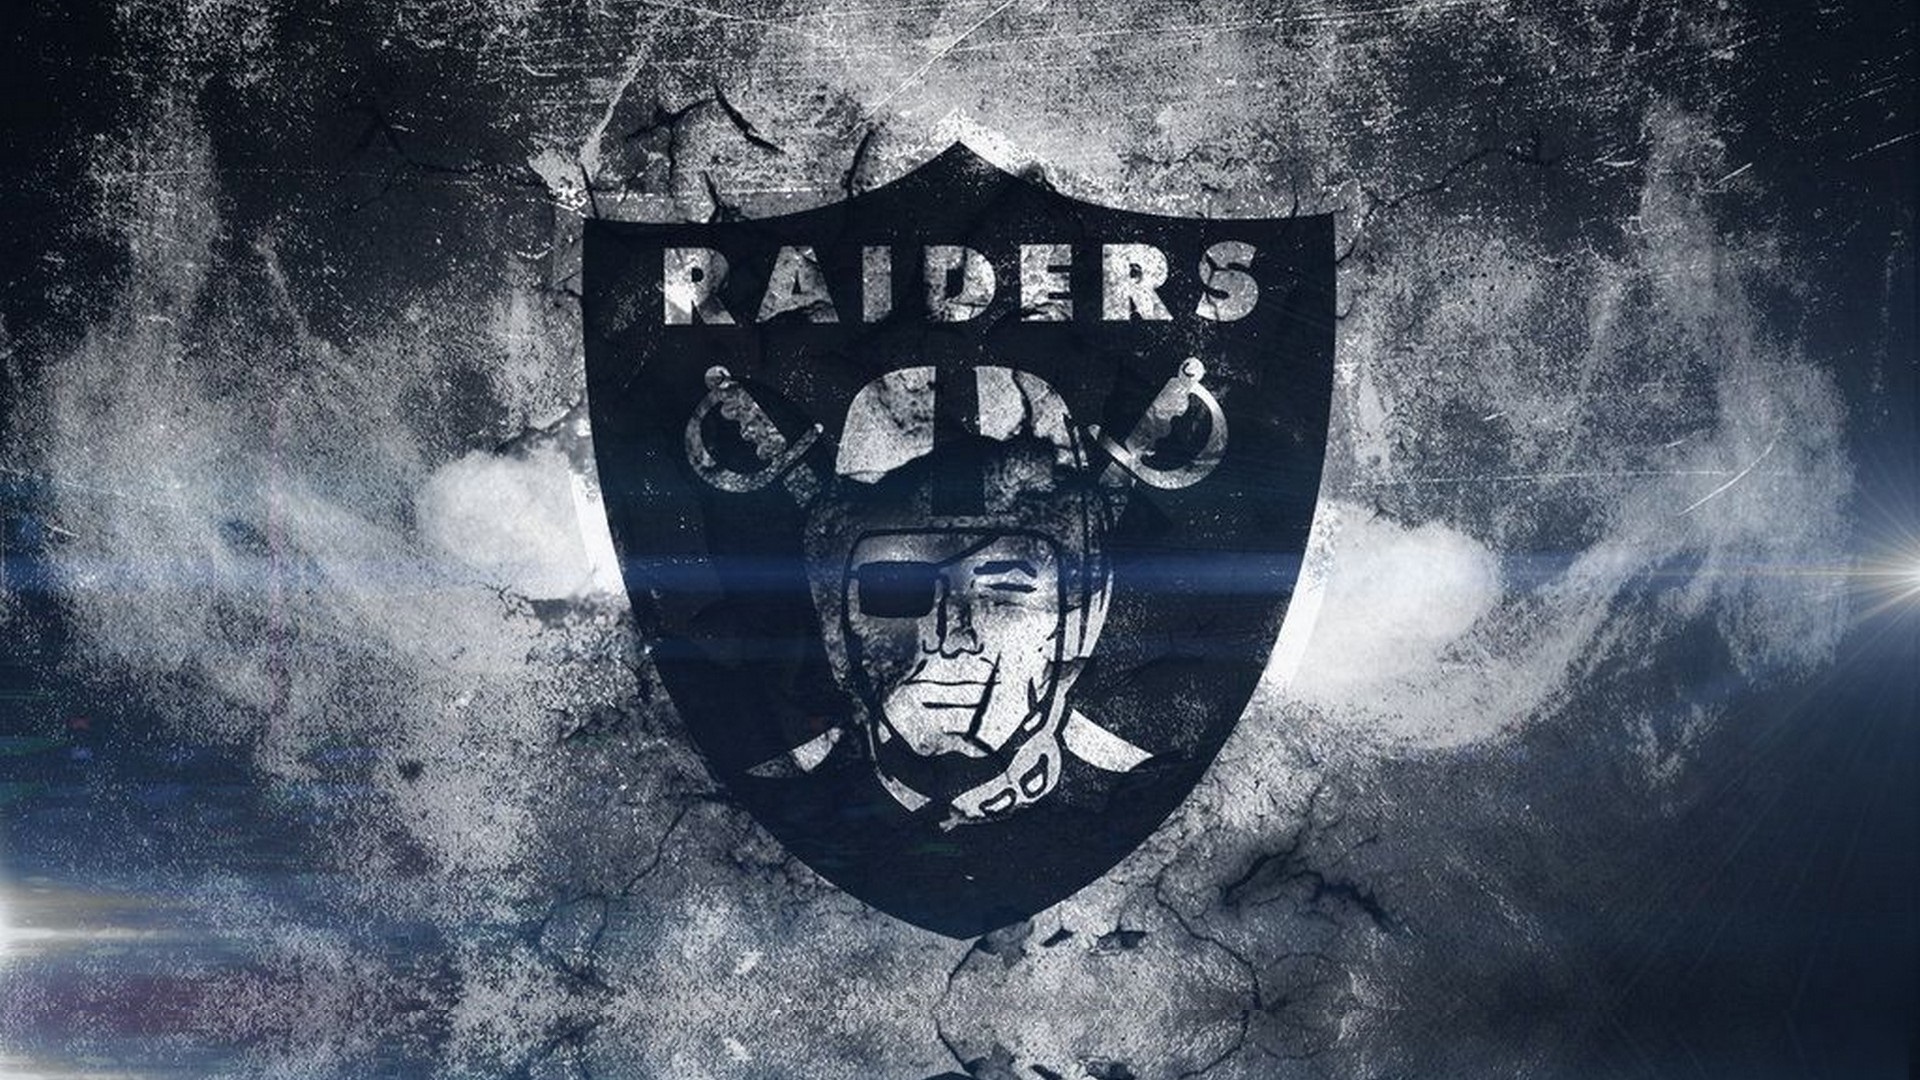 Oakland Raiders NFL Desktop Wallpapers With high-resolution 1920X1080 pixel. You can use this wallpaper for your Mac or Windows Desktop Background, iPhone, Android or Tablet and another Smartphone device